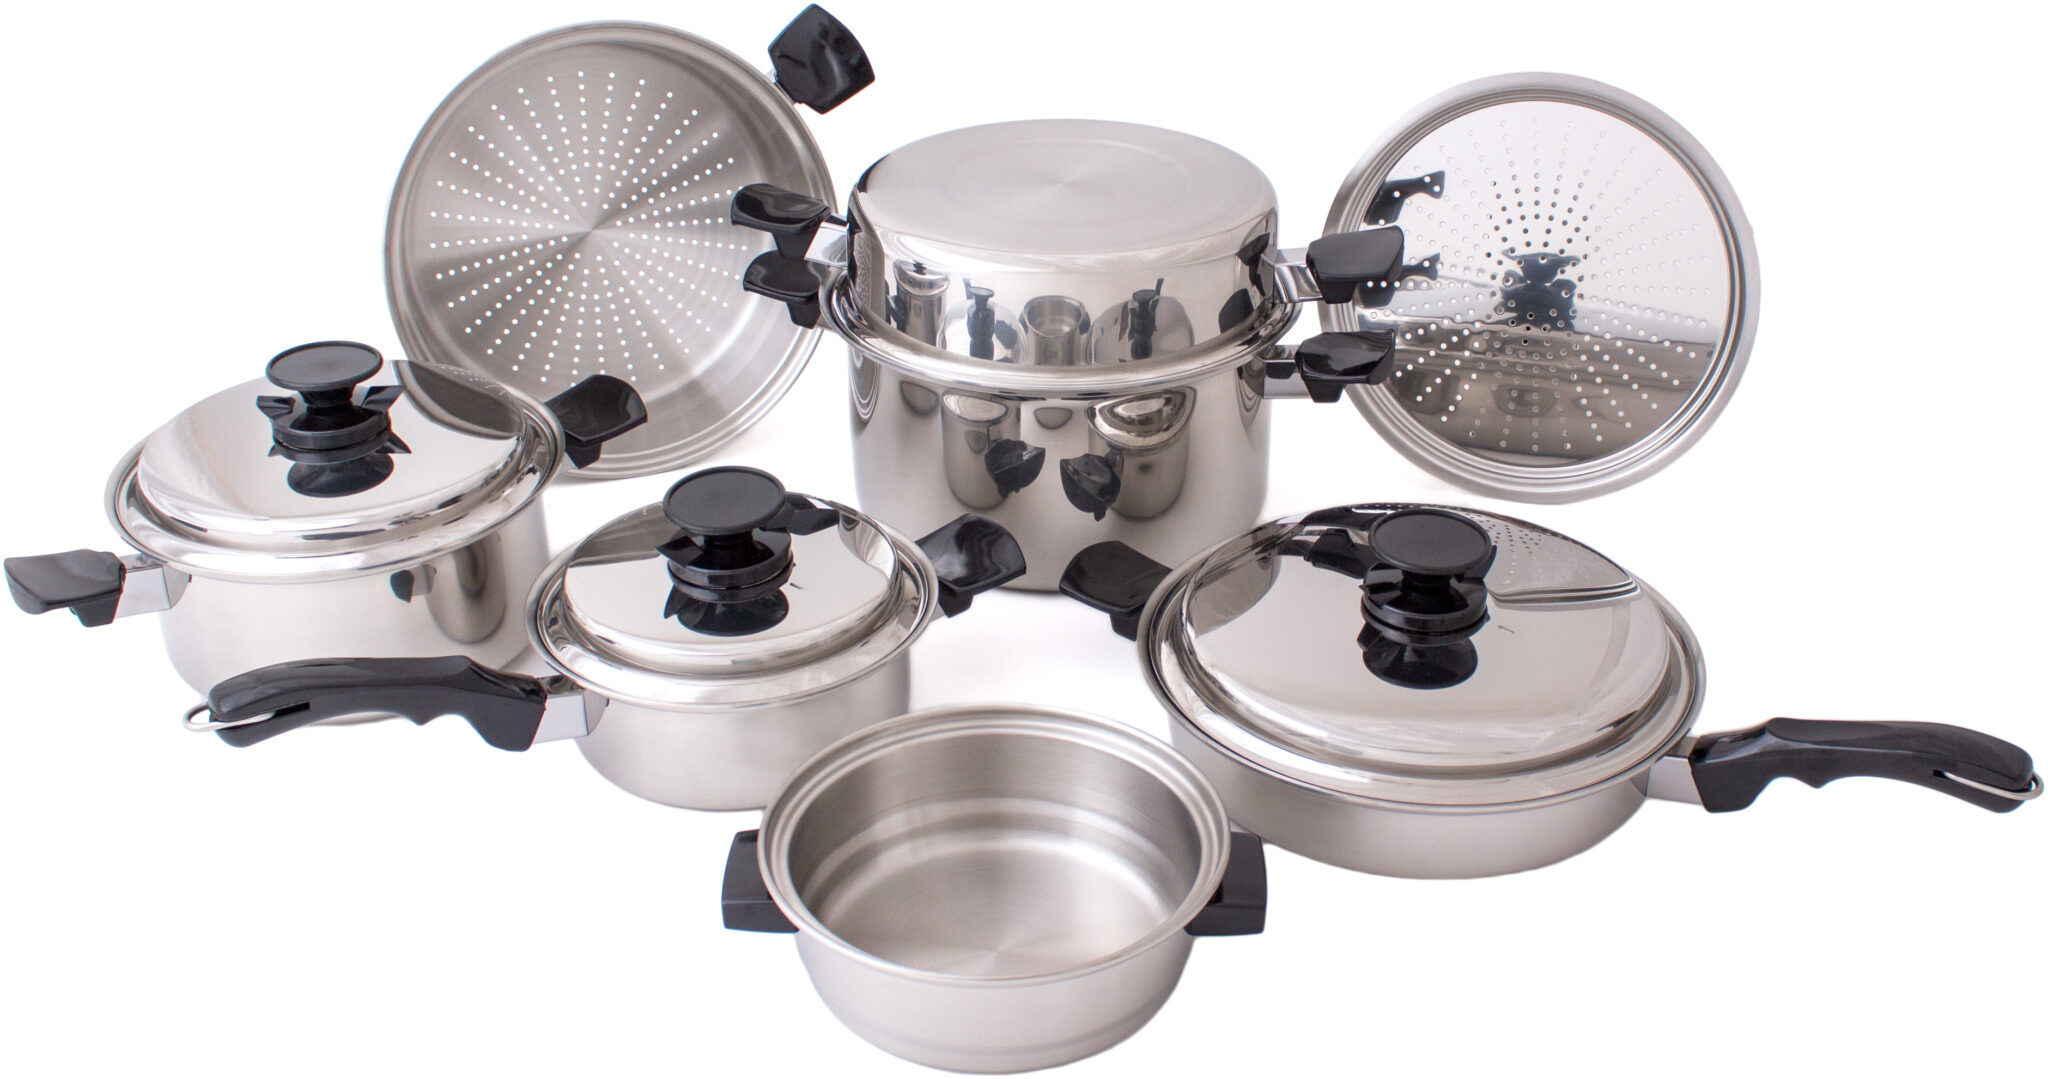 Canadian Cookware